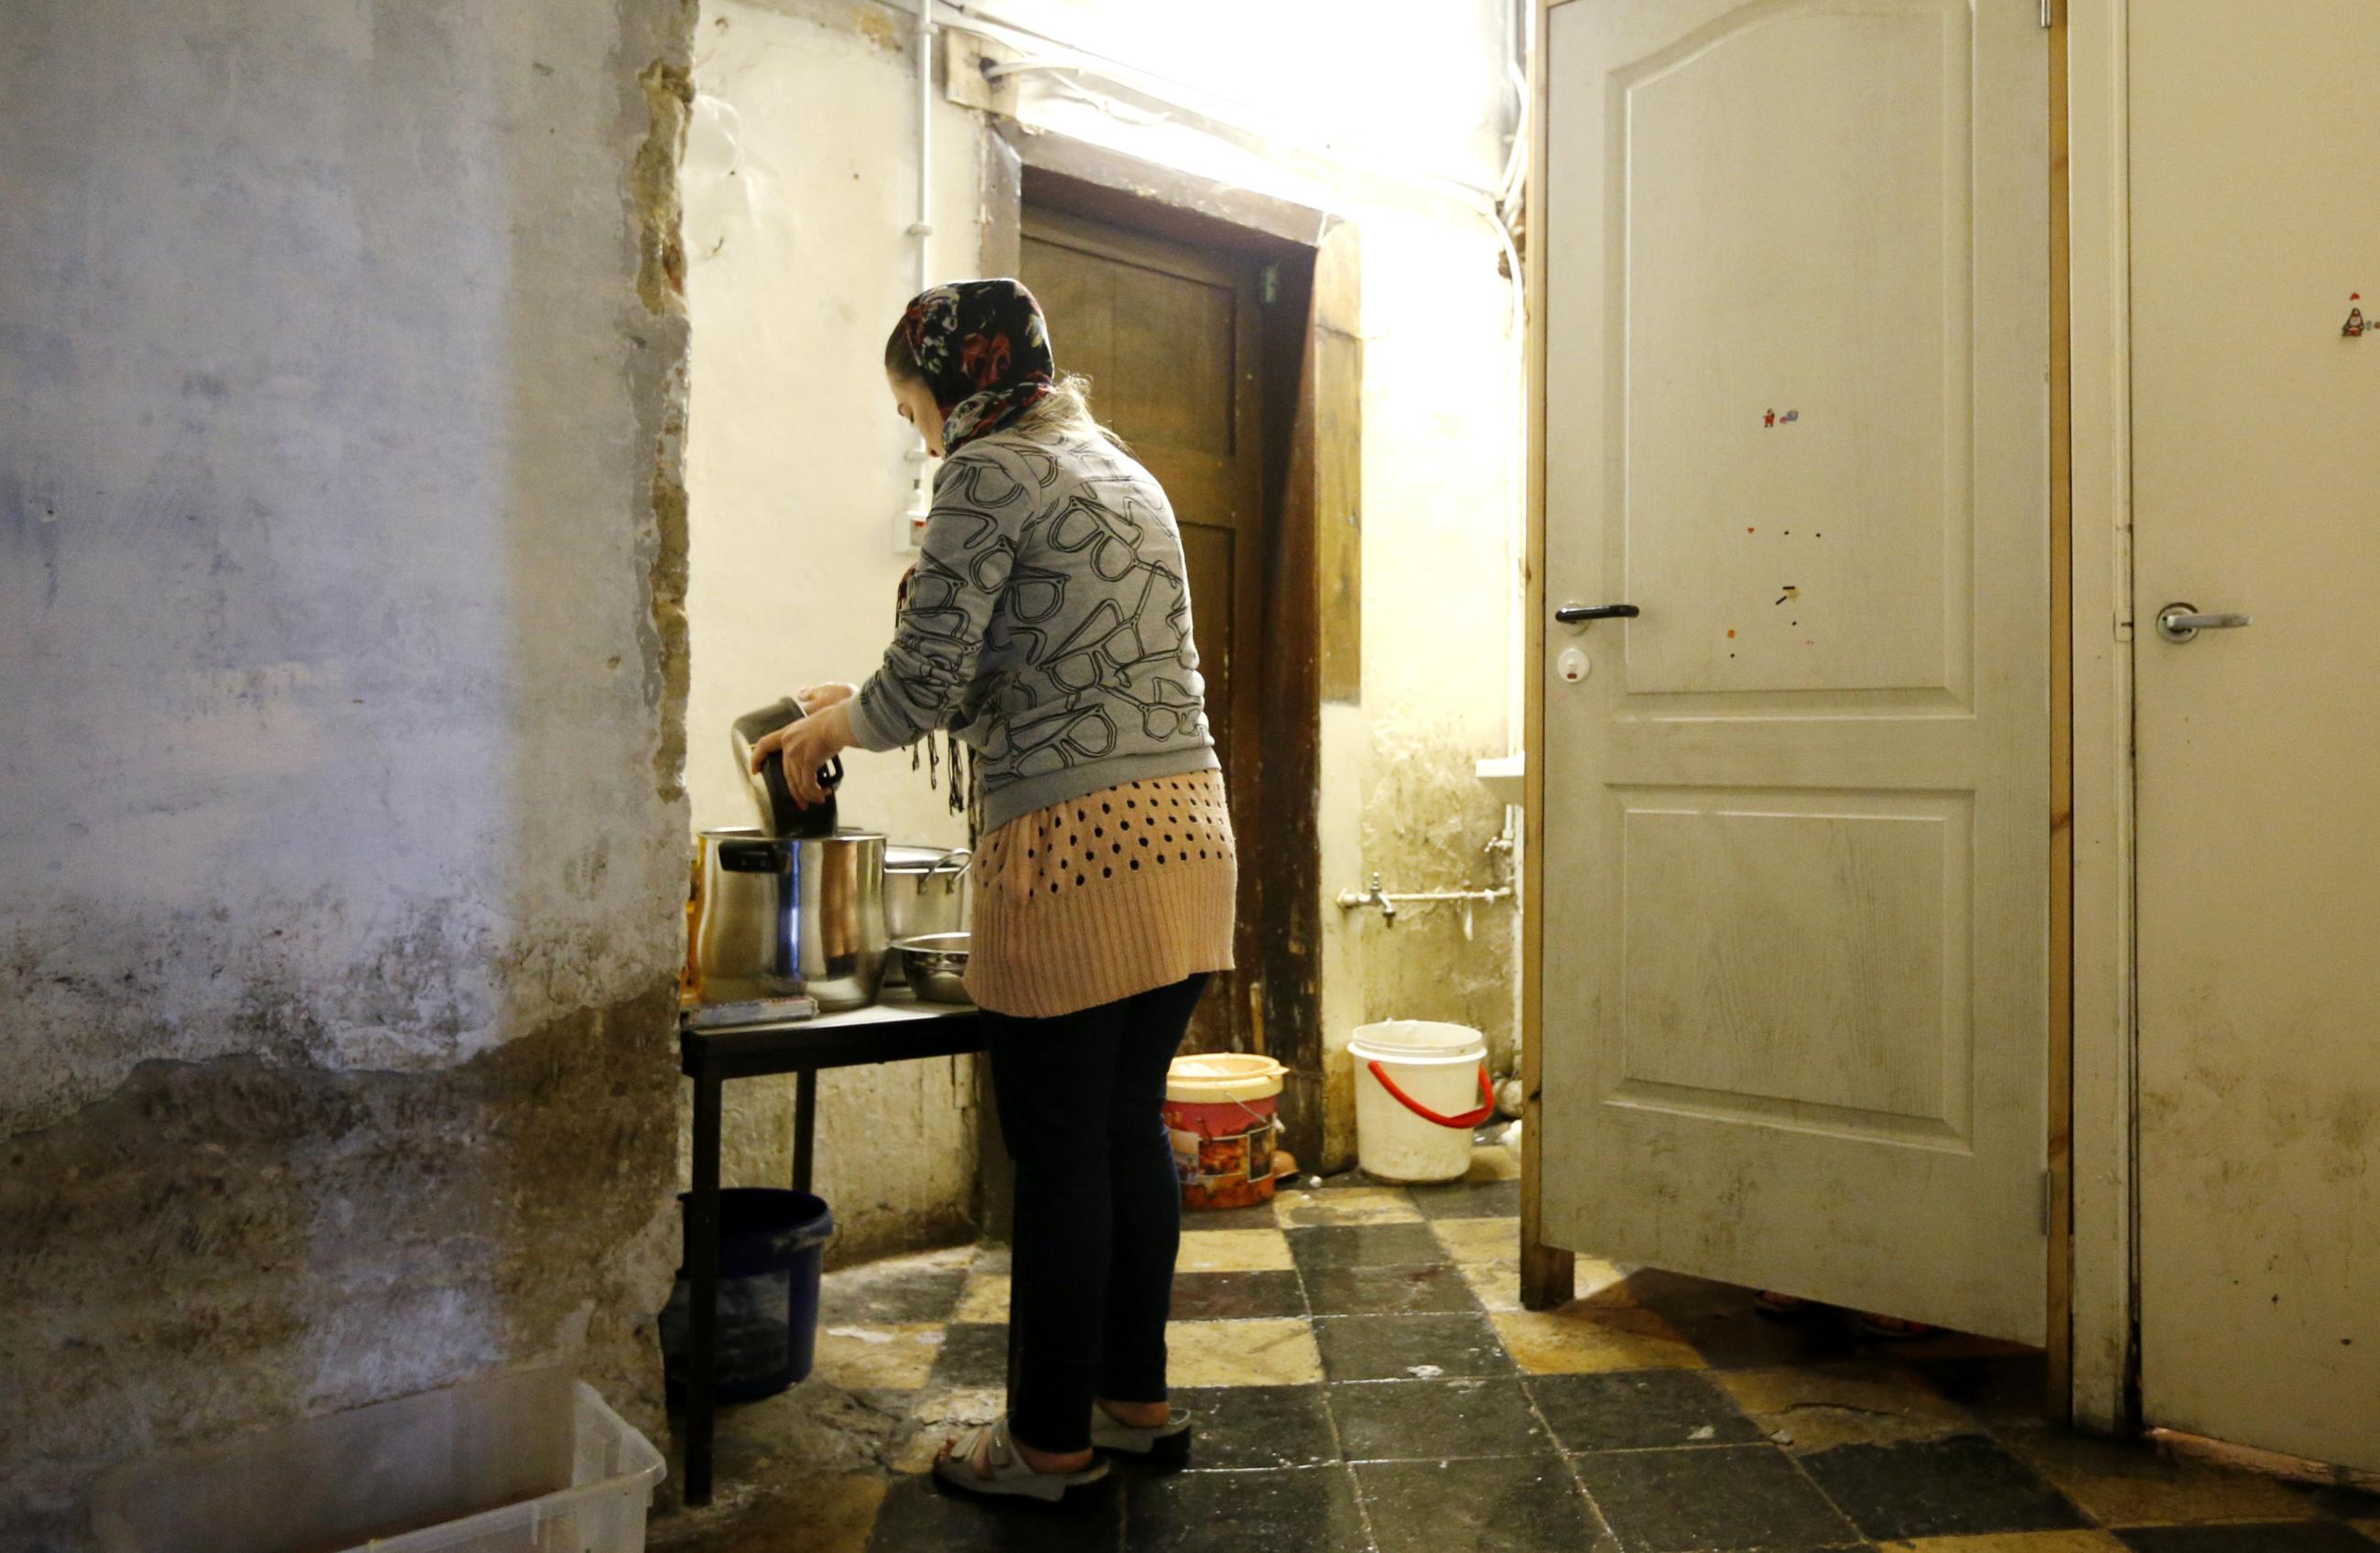 An Afghan woman washes dishes in the toilet of the Church of Saint John the Baptist at the Beguinage in central Brussels, which is occupied by asylum seekers, on January 30, 2014